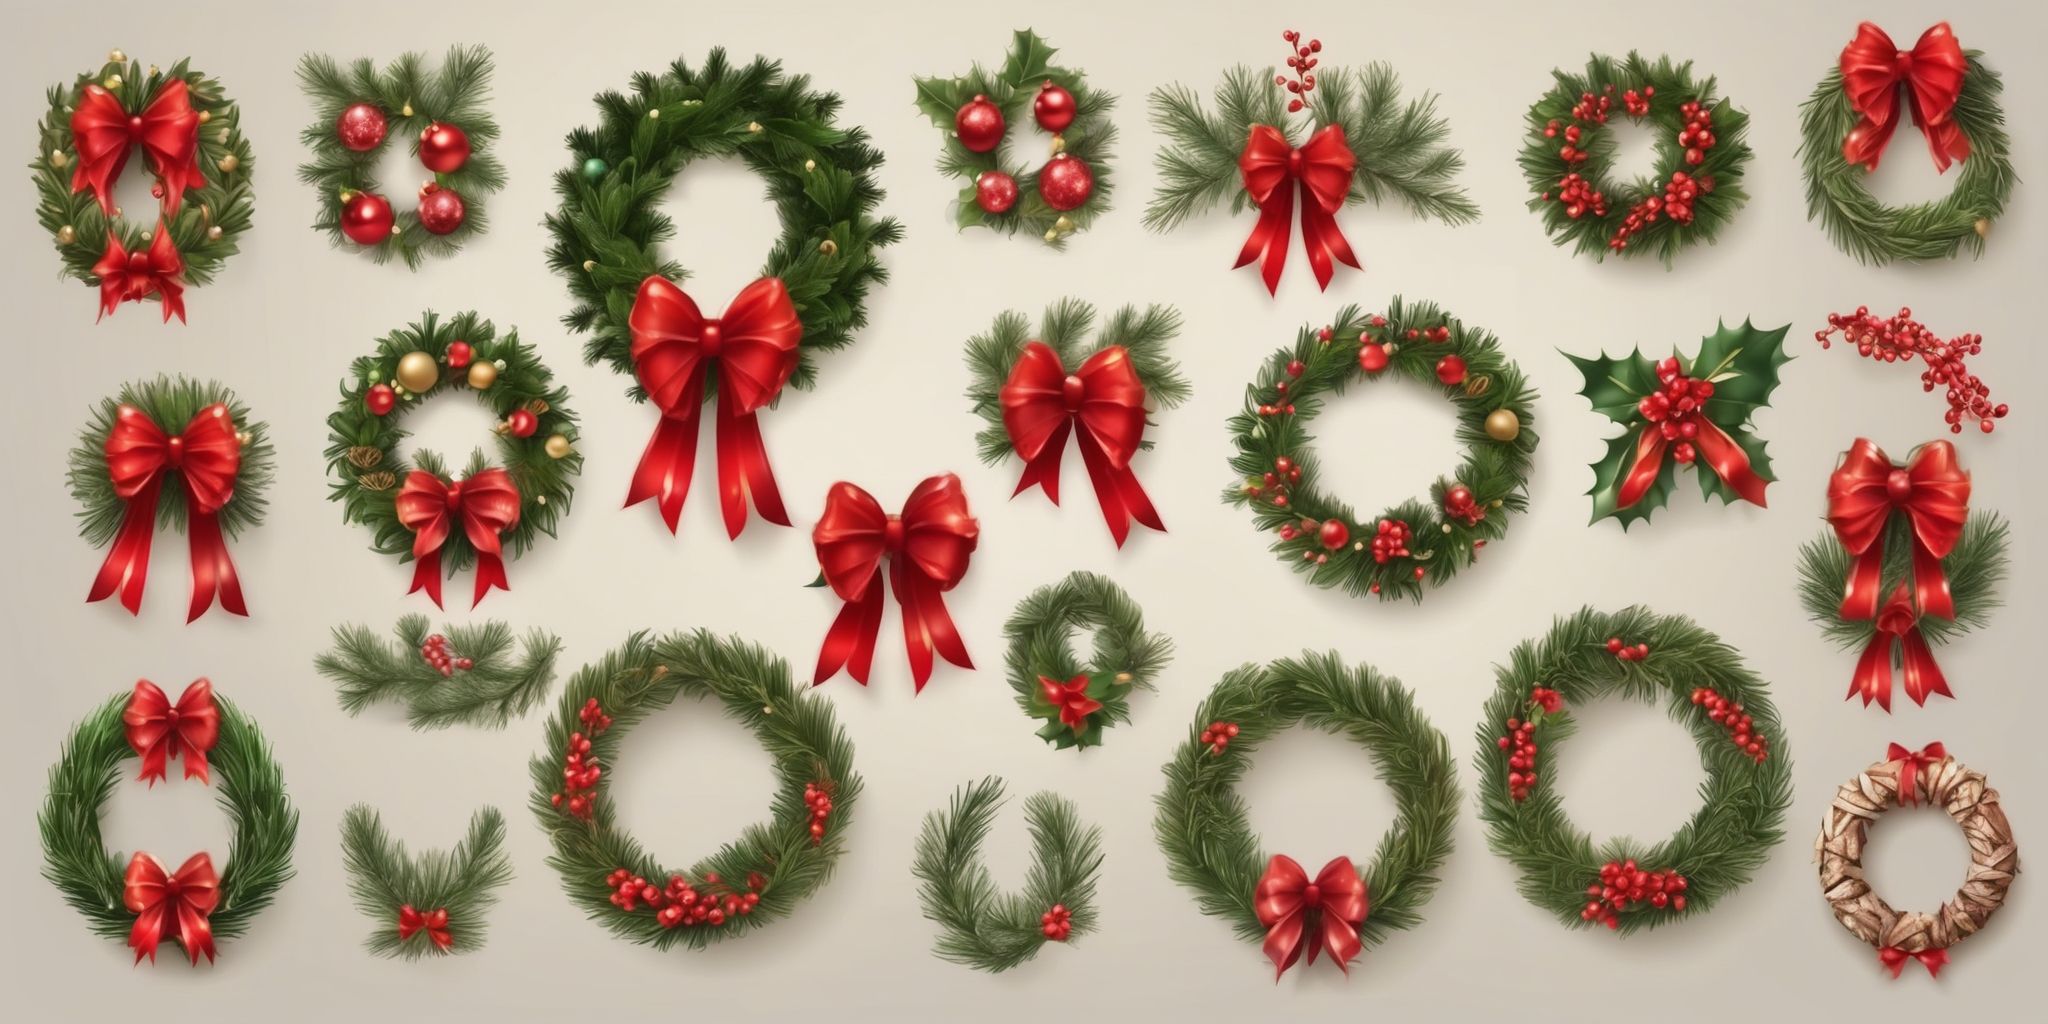 Wreaths in realistic Christmas style